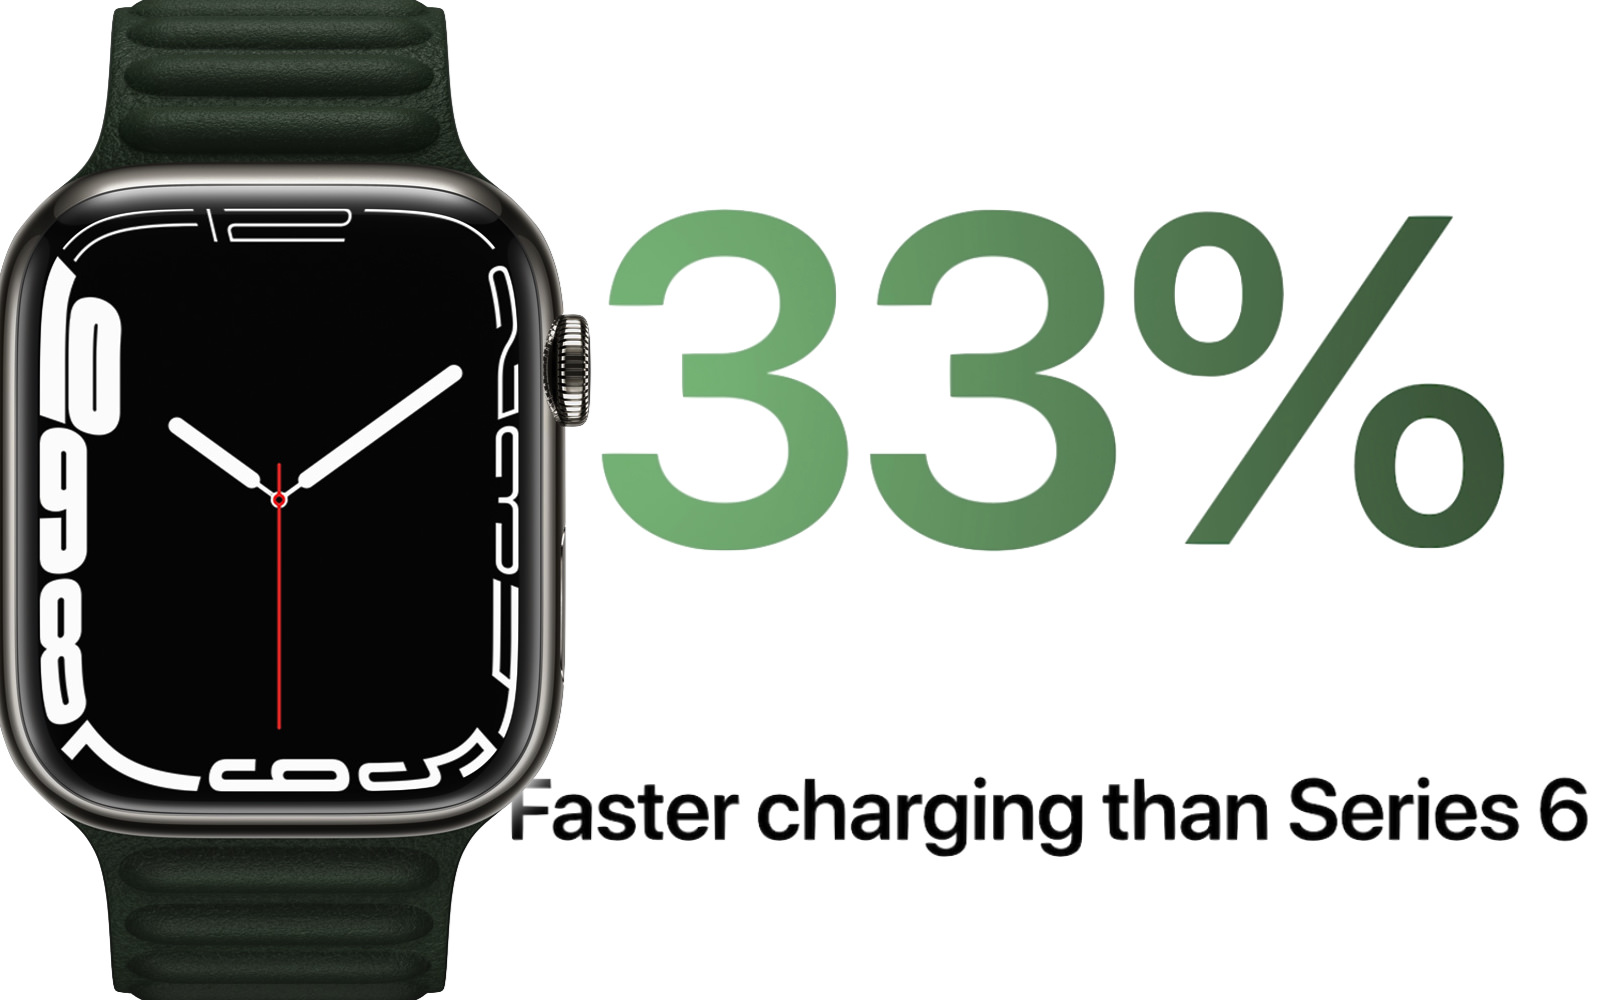 33 percent faster charging